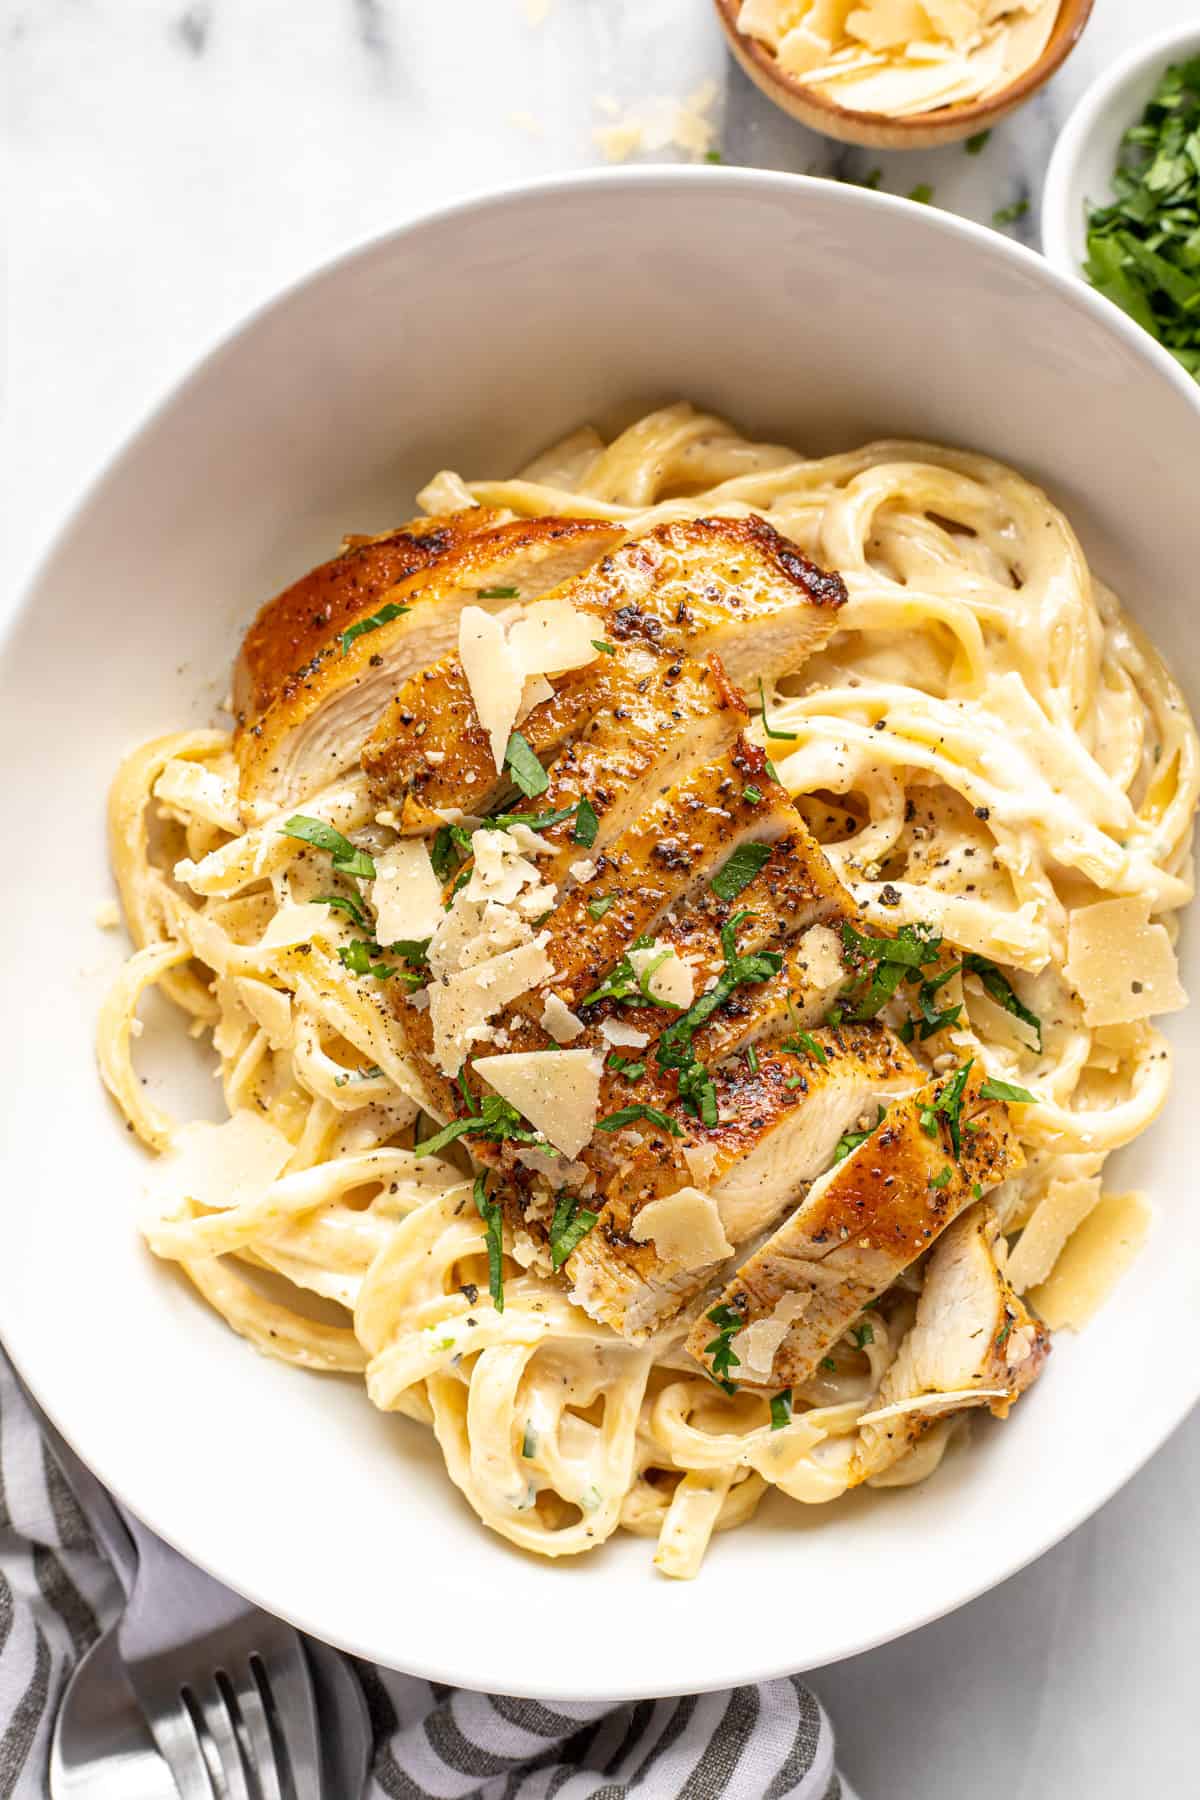 Large white bowl filled with homemade fettuccine alfredo topped with chicken and Parmesan cheese.